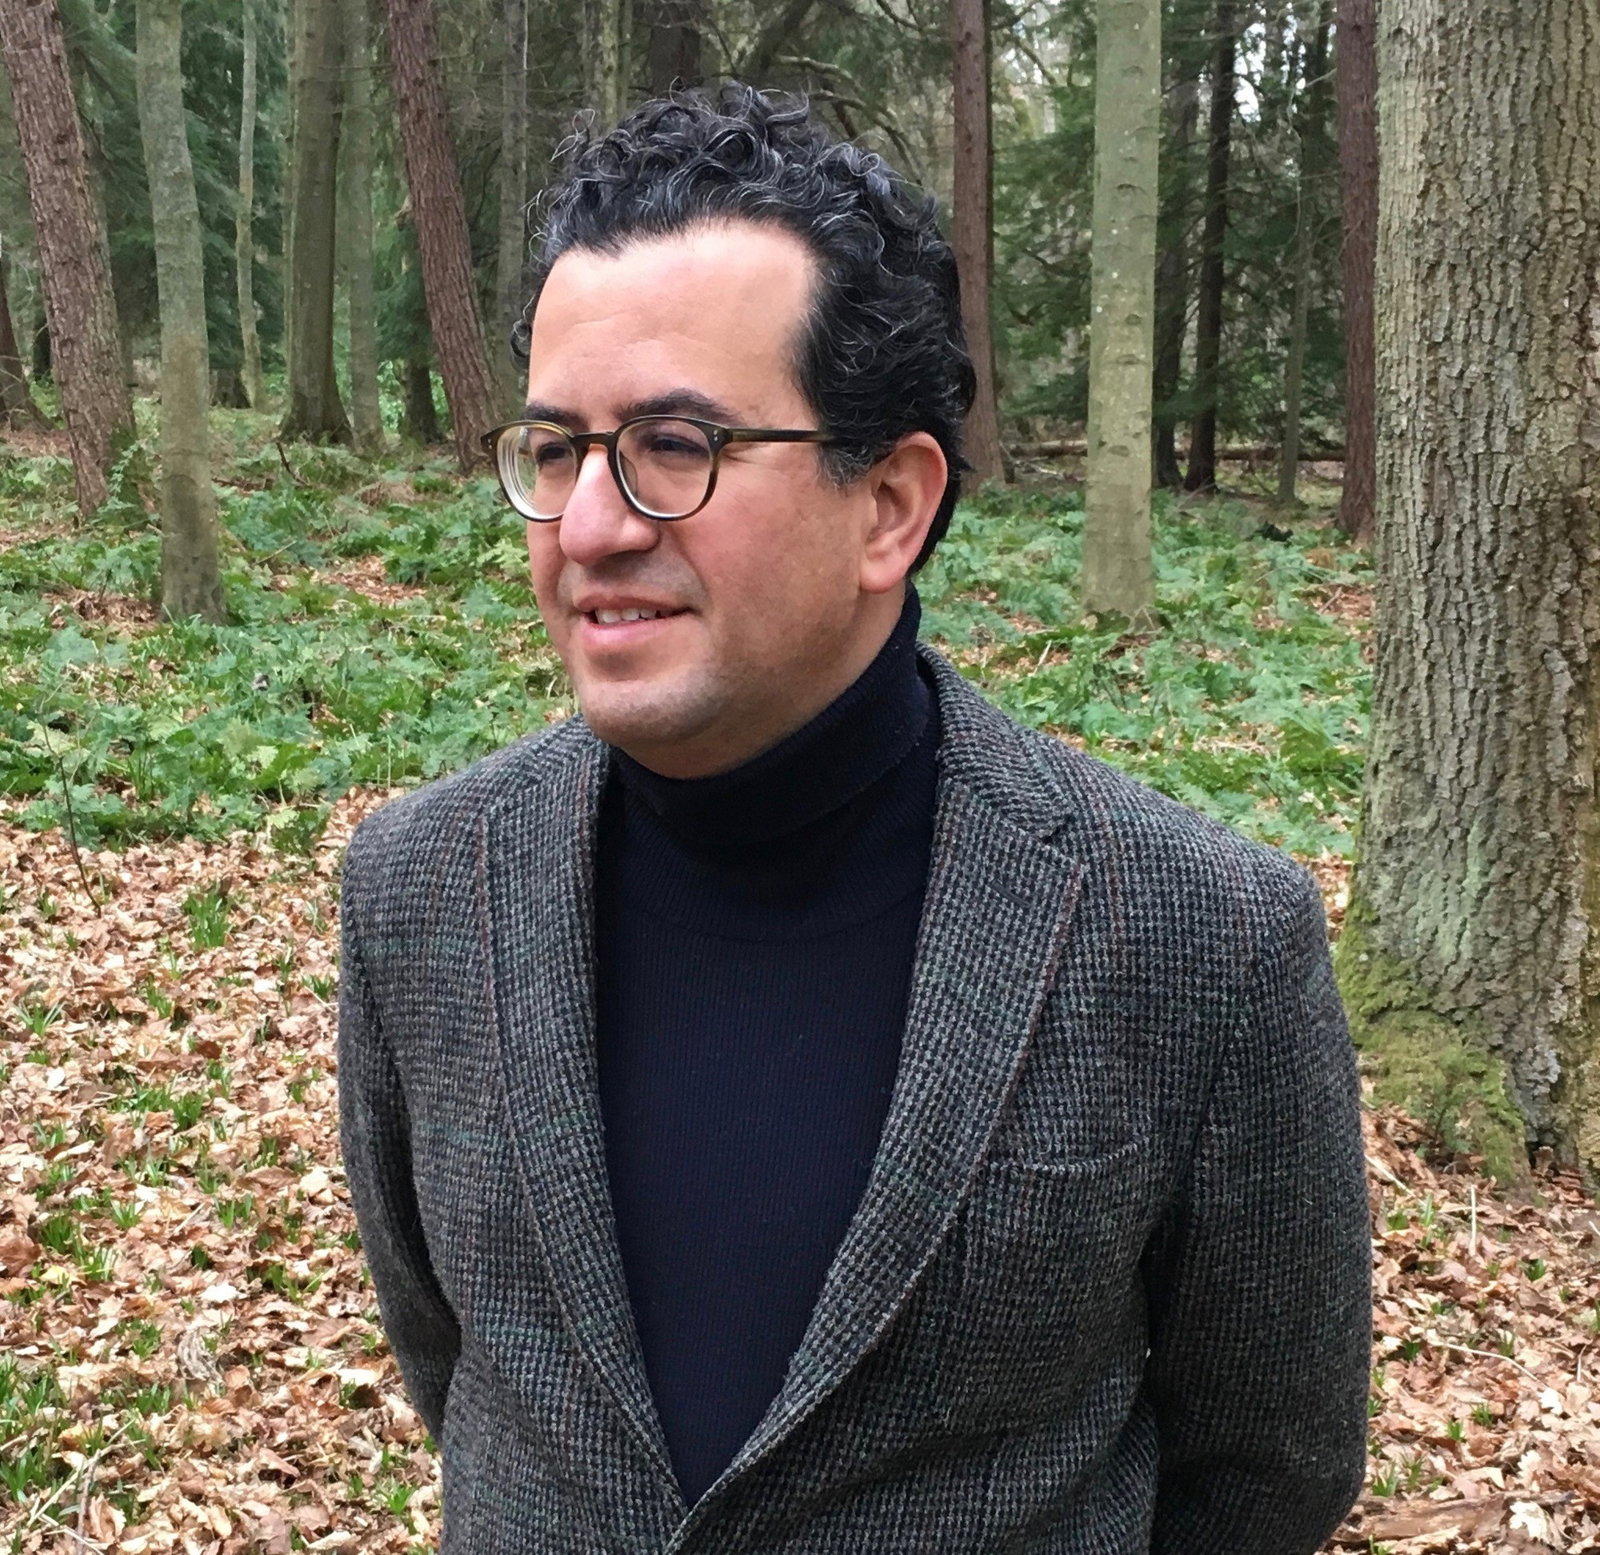 A man with curly black hair and round glasses wears a black turtleneck and tweed jacket, and stands in a forest, looking away.